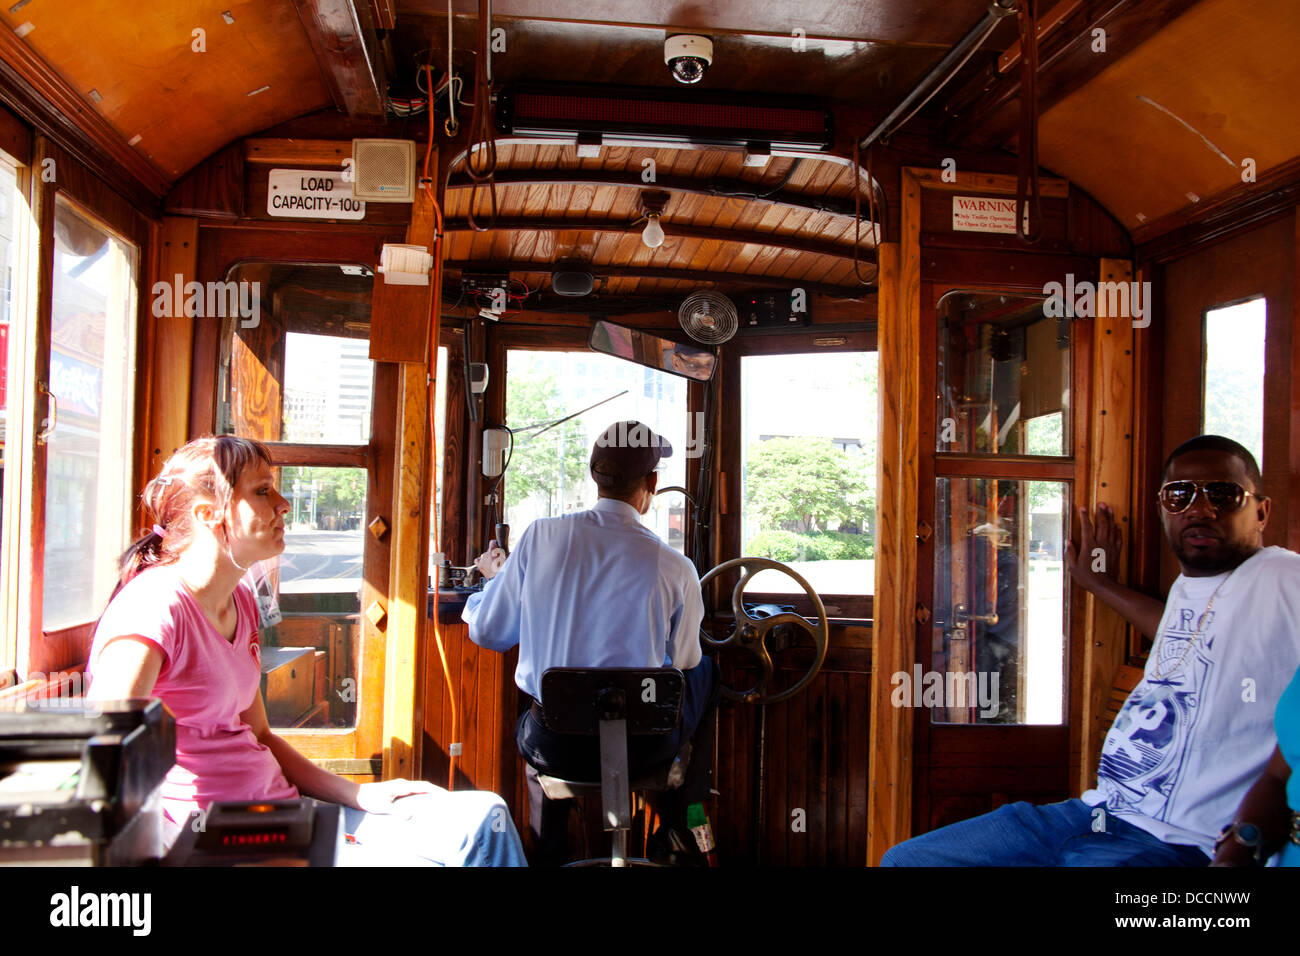 Interior of a vintage tram trolley car and its driver in Memphis Tennessee usa Stock Photo